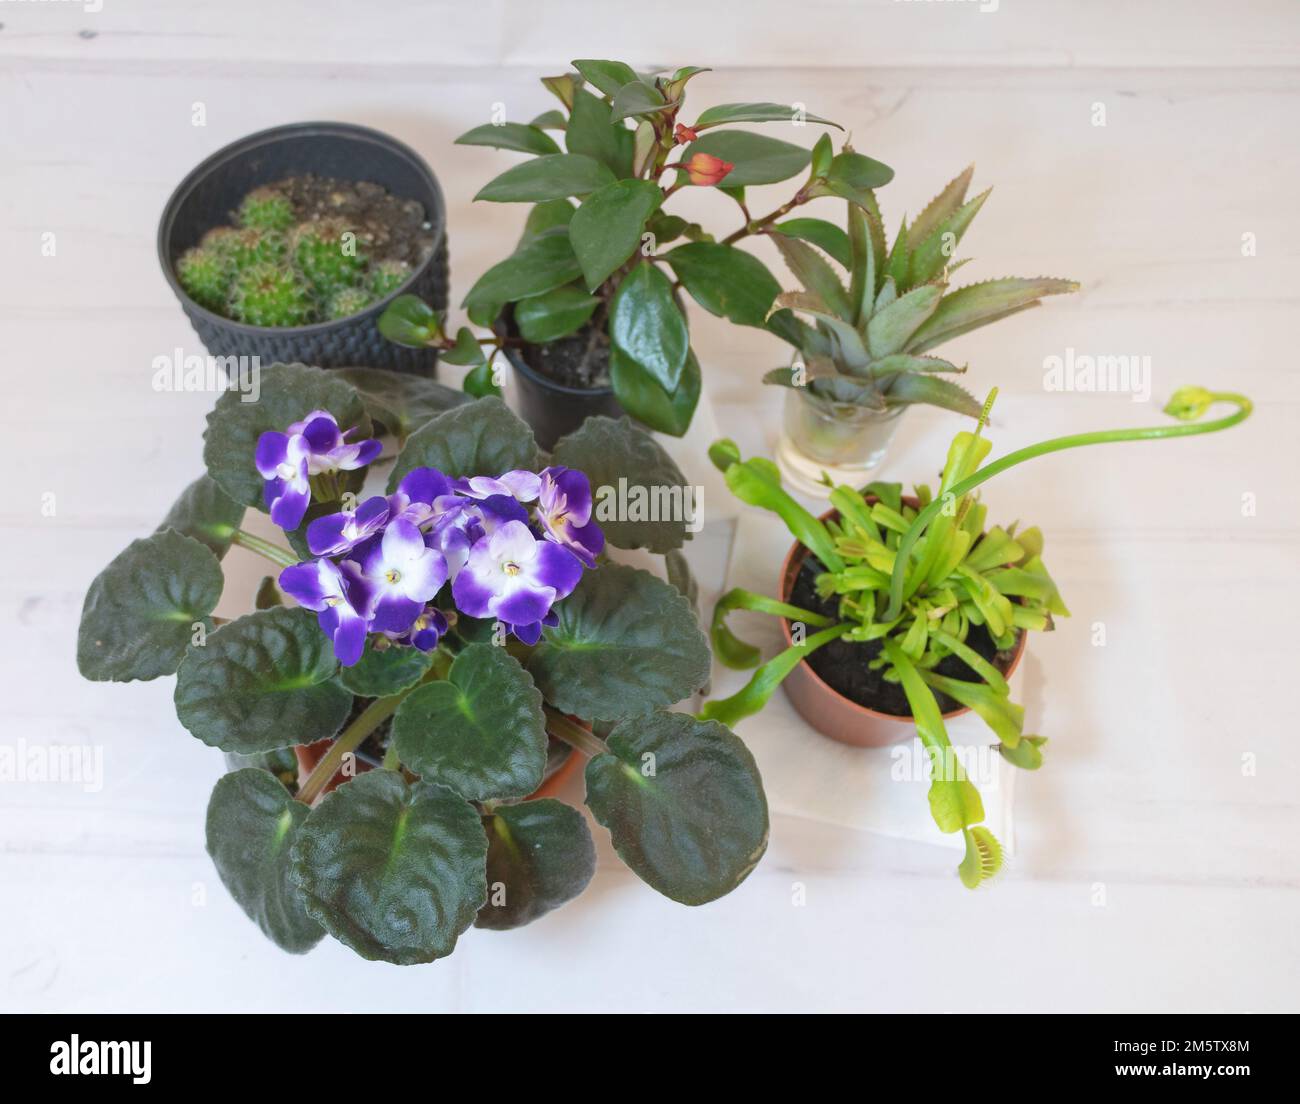 A group of plants together on a white background like african violet, goldfish plant, carnivore plant and cacti Stock Photo